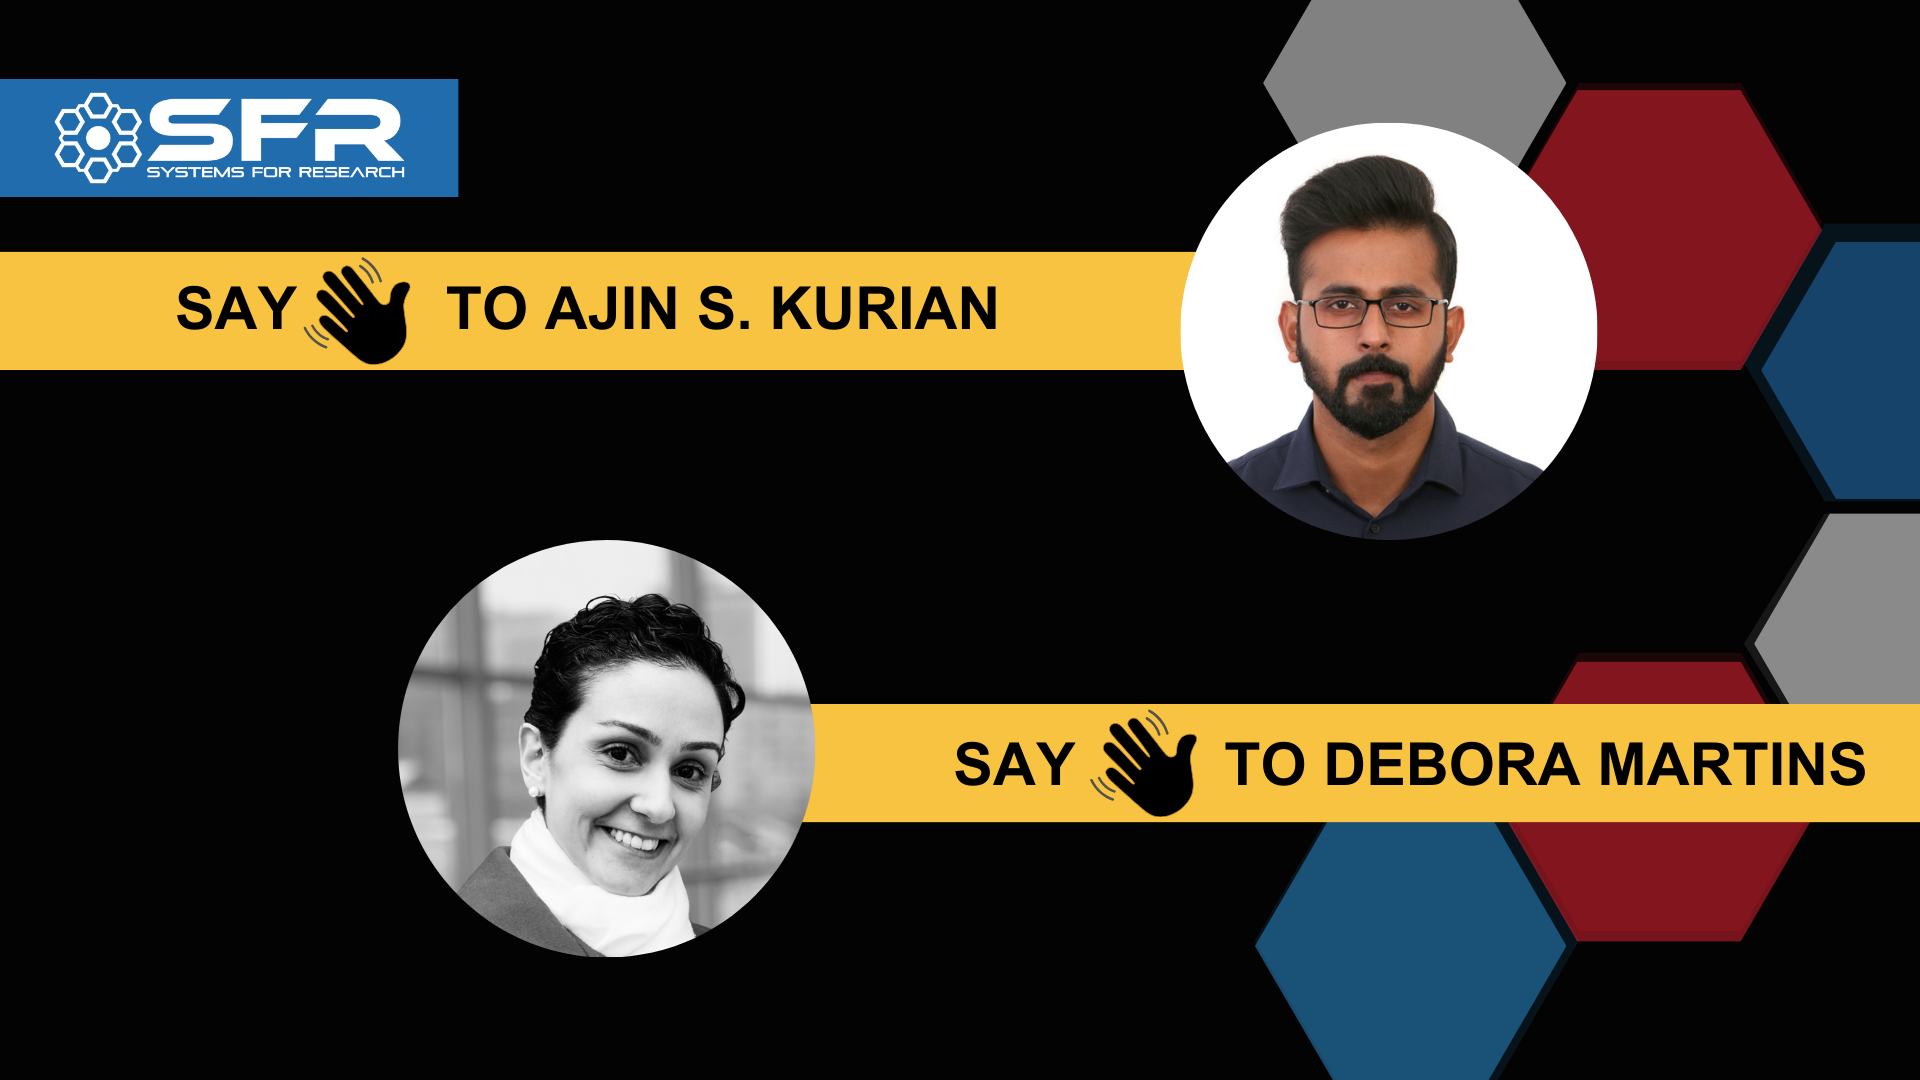 Introducing the Newest Members of the SFR Team, Ajin and Debora!